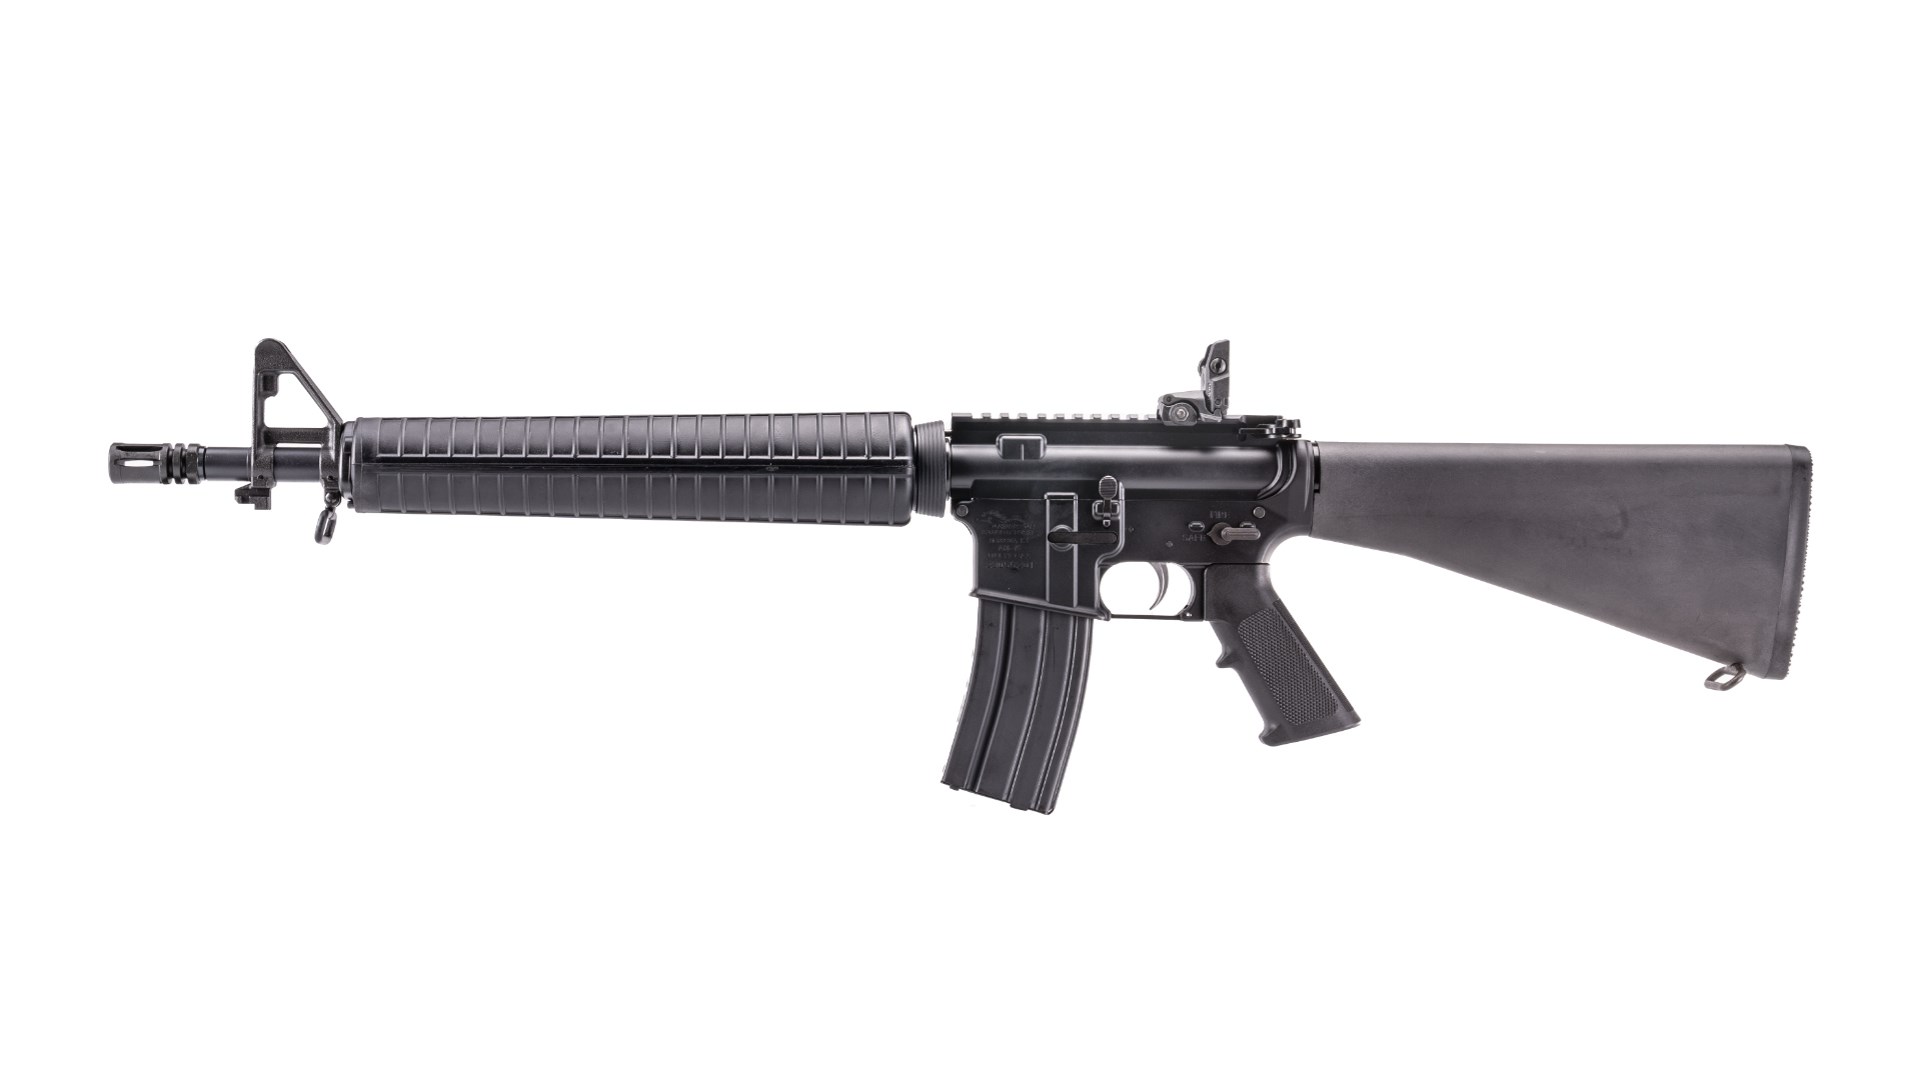 Left side of the all-black Anderson AM-15 Dissipator AR-15.